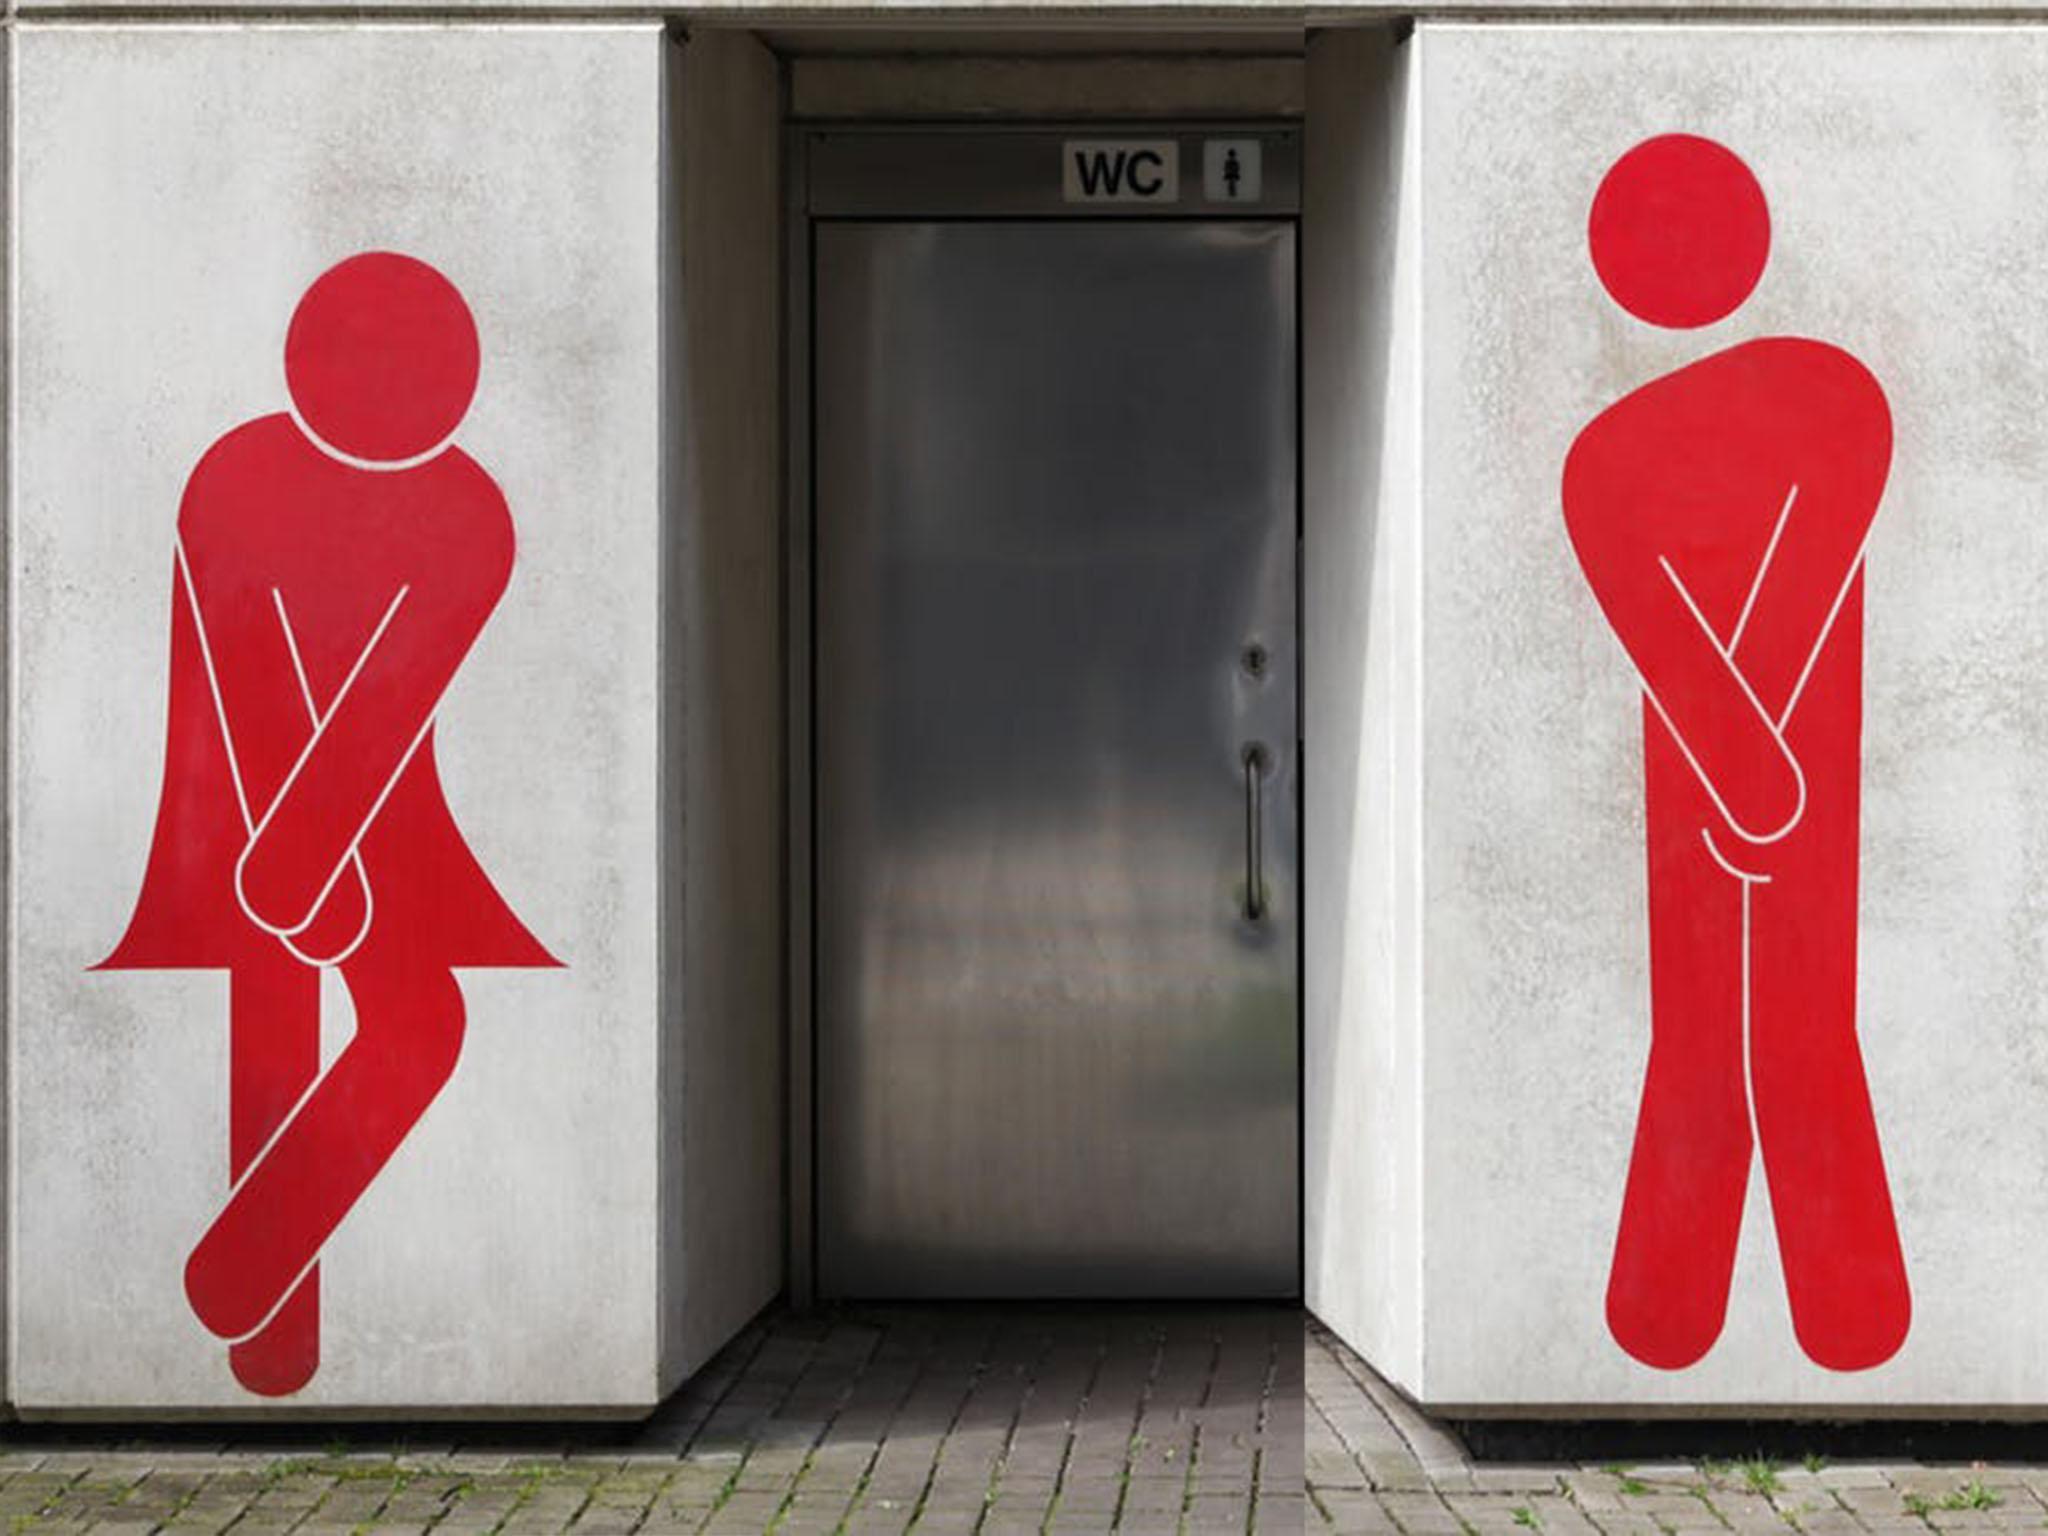 Urinary incontinence is a health condition that seriously undermines quality of life